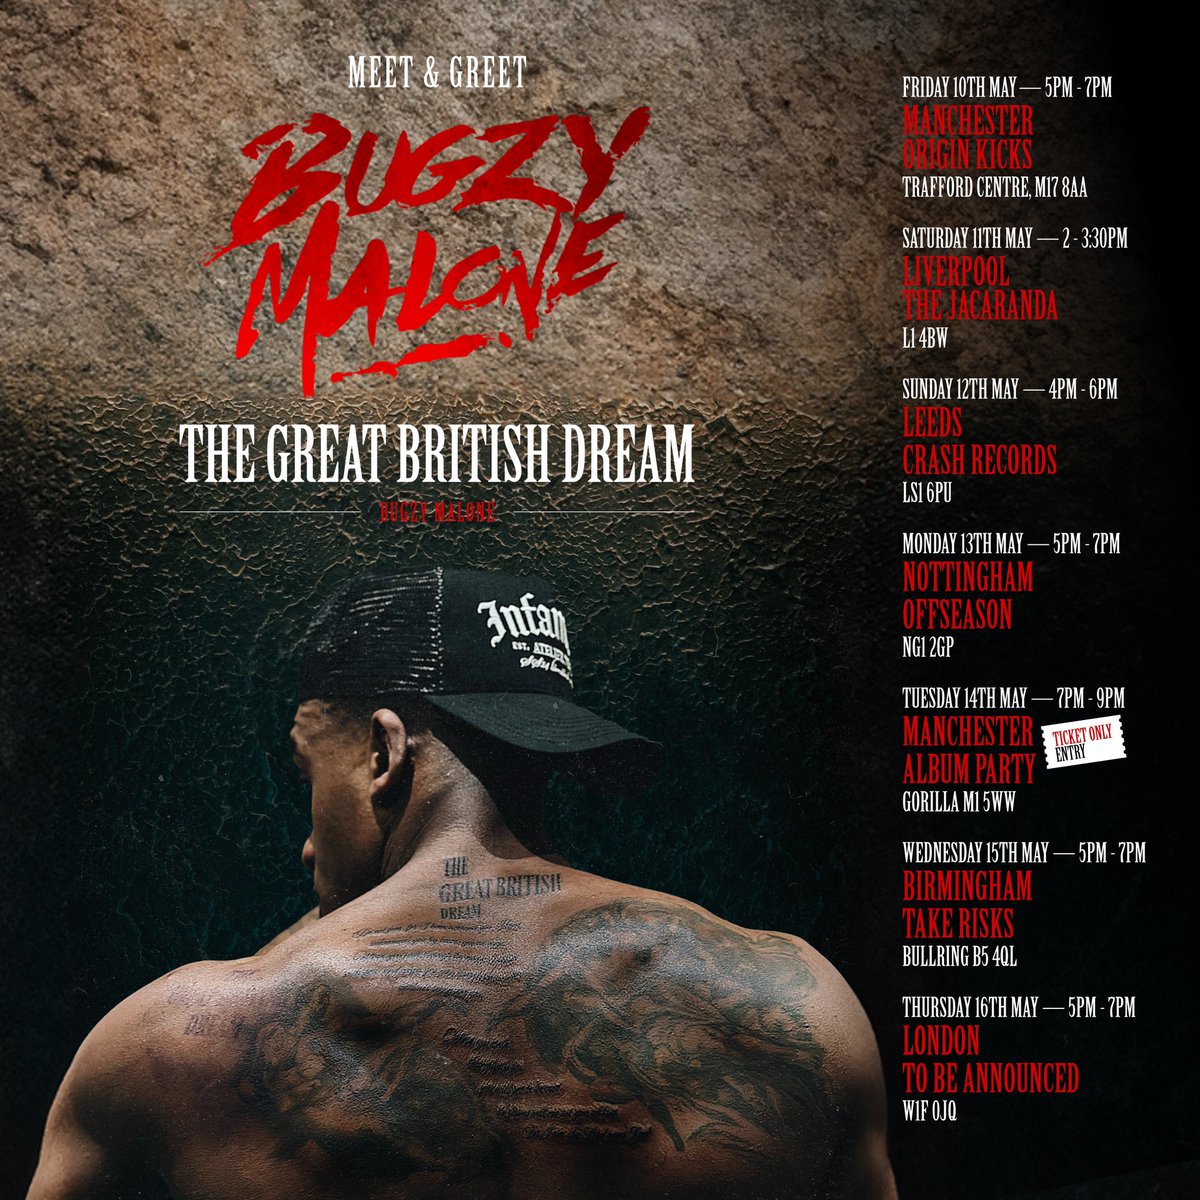 It’s release the week of The Great British Dream and we’re celebrating across the country 🔥 The meet and greet starts May 10th at the Trafford Centre  #Manchester 

#TheGreatBritishDream🇬🇧